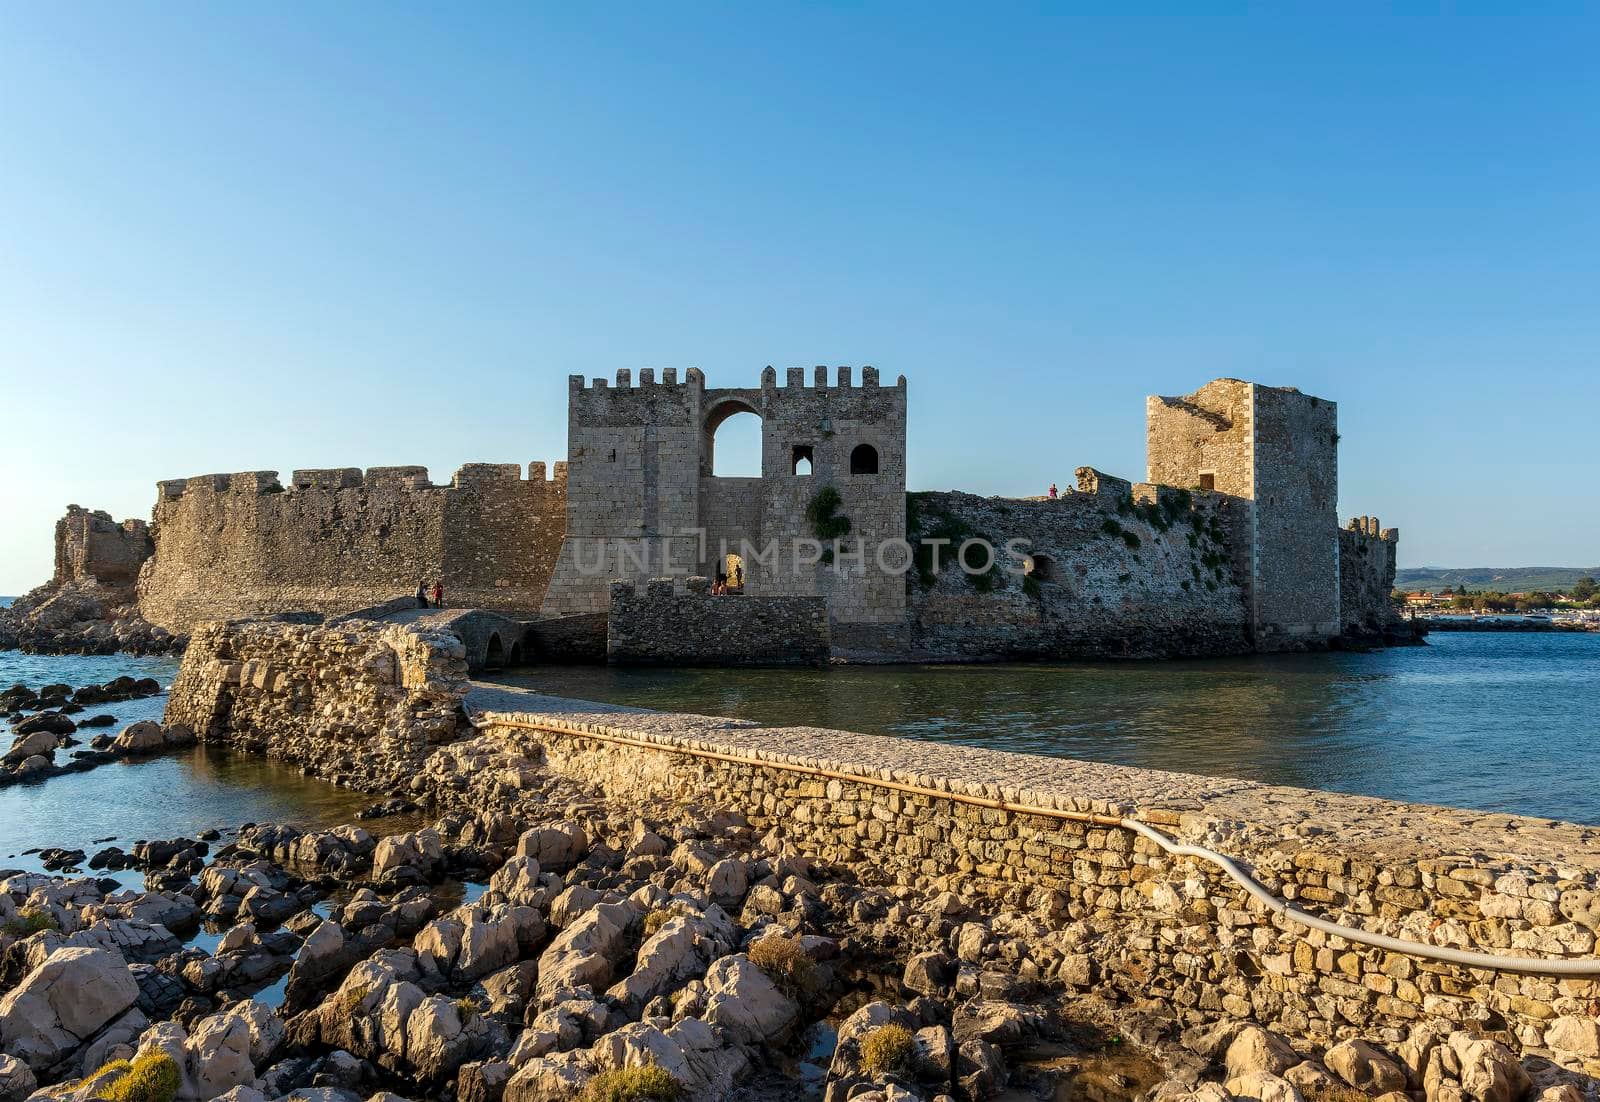 Methoni, Greece - August 10, 2018: The Methoni Venetian Fortress in the Peloponnese, Messenia, Greece. The castle of Methoni was built by the Venetians after 1209.